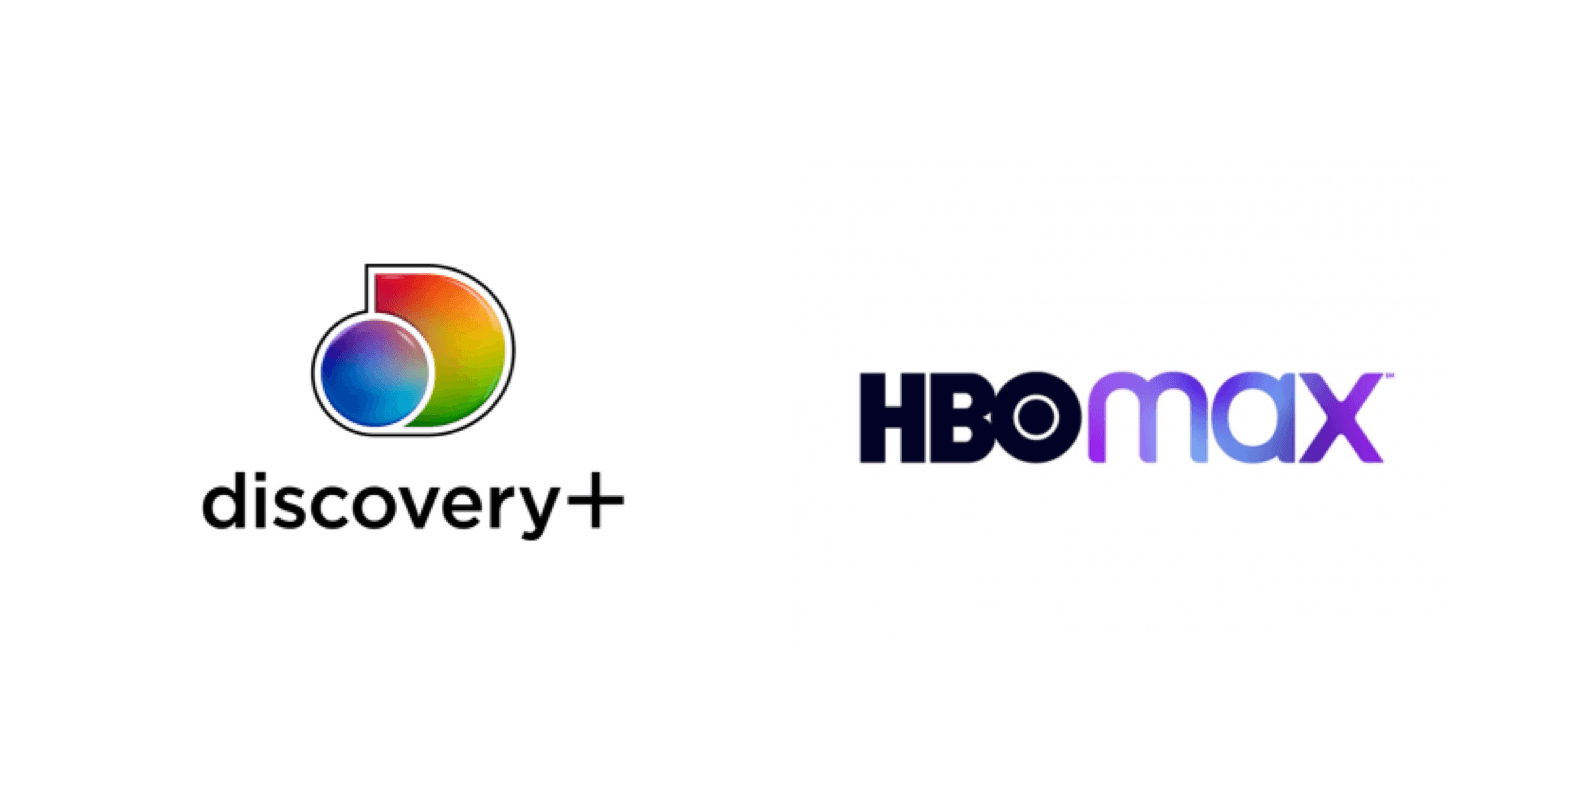 AT&T Confirms Deal with Discovery That Would Form Standalone Entertainment Company